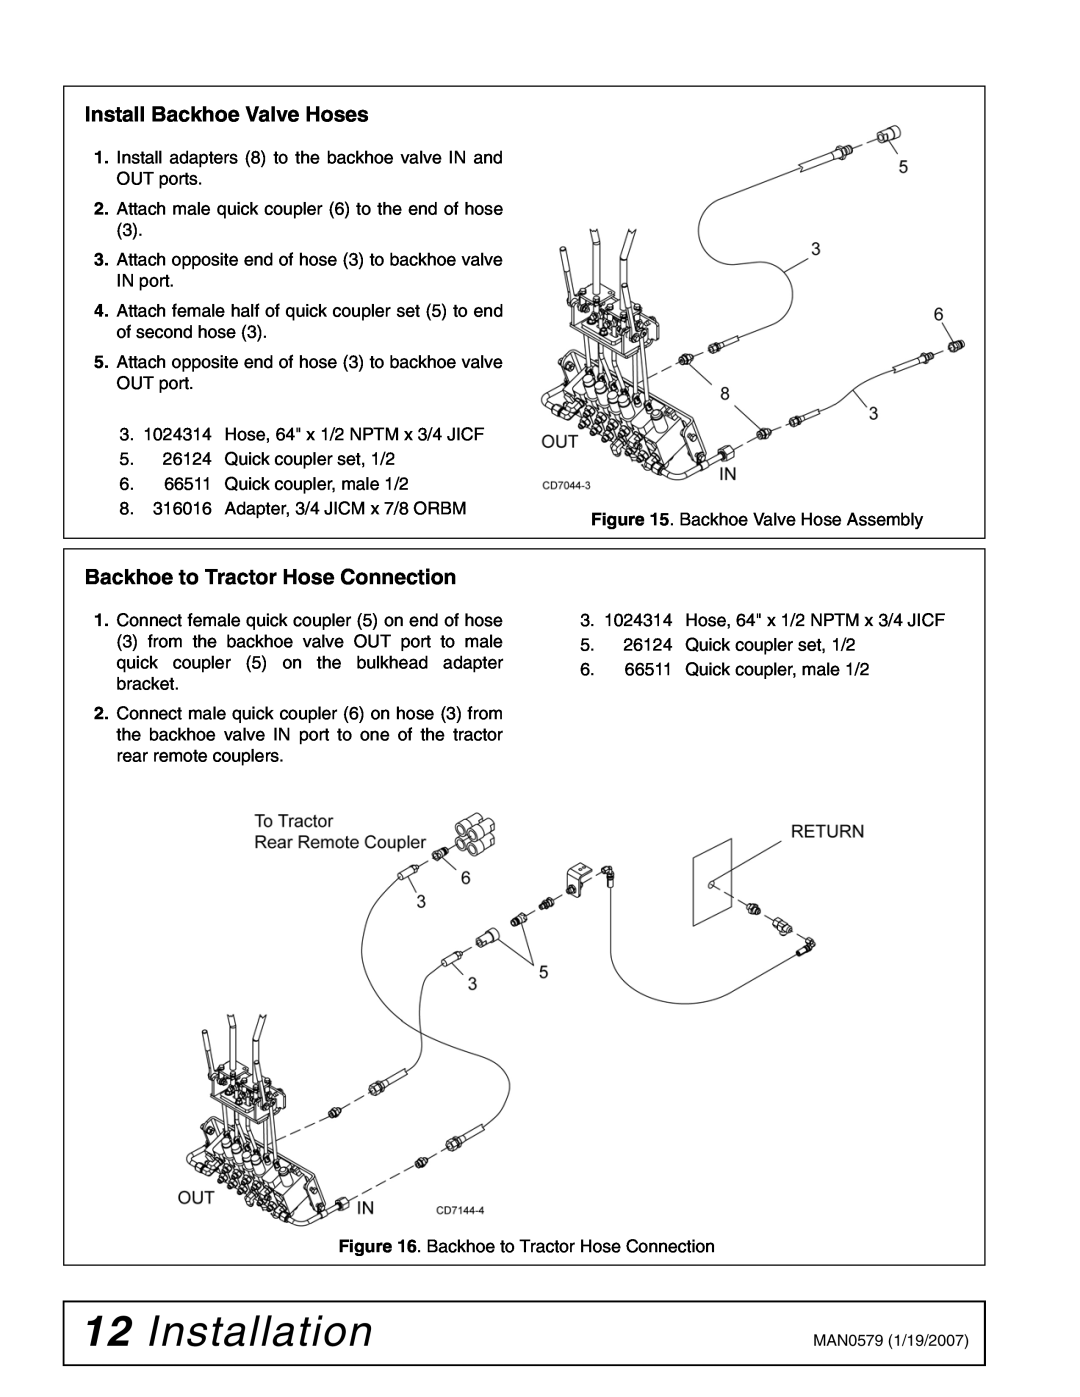 Woods Equipment 1023000 installation manual Installation, Install Backhoe Valve Hoses, Backhoe to Tractor Hose Connection 